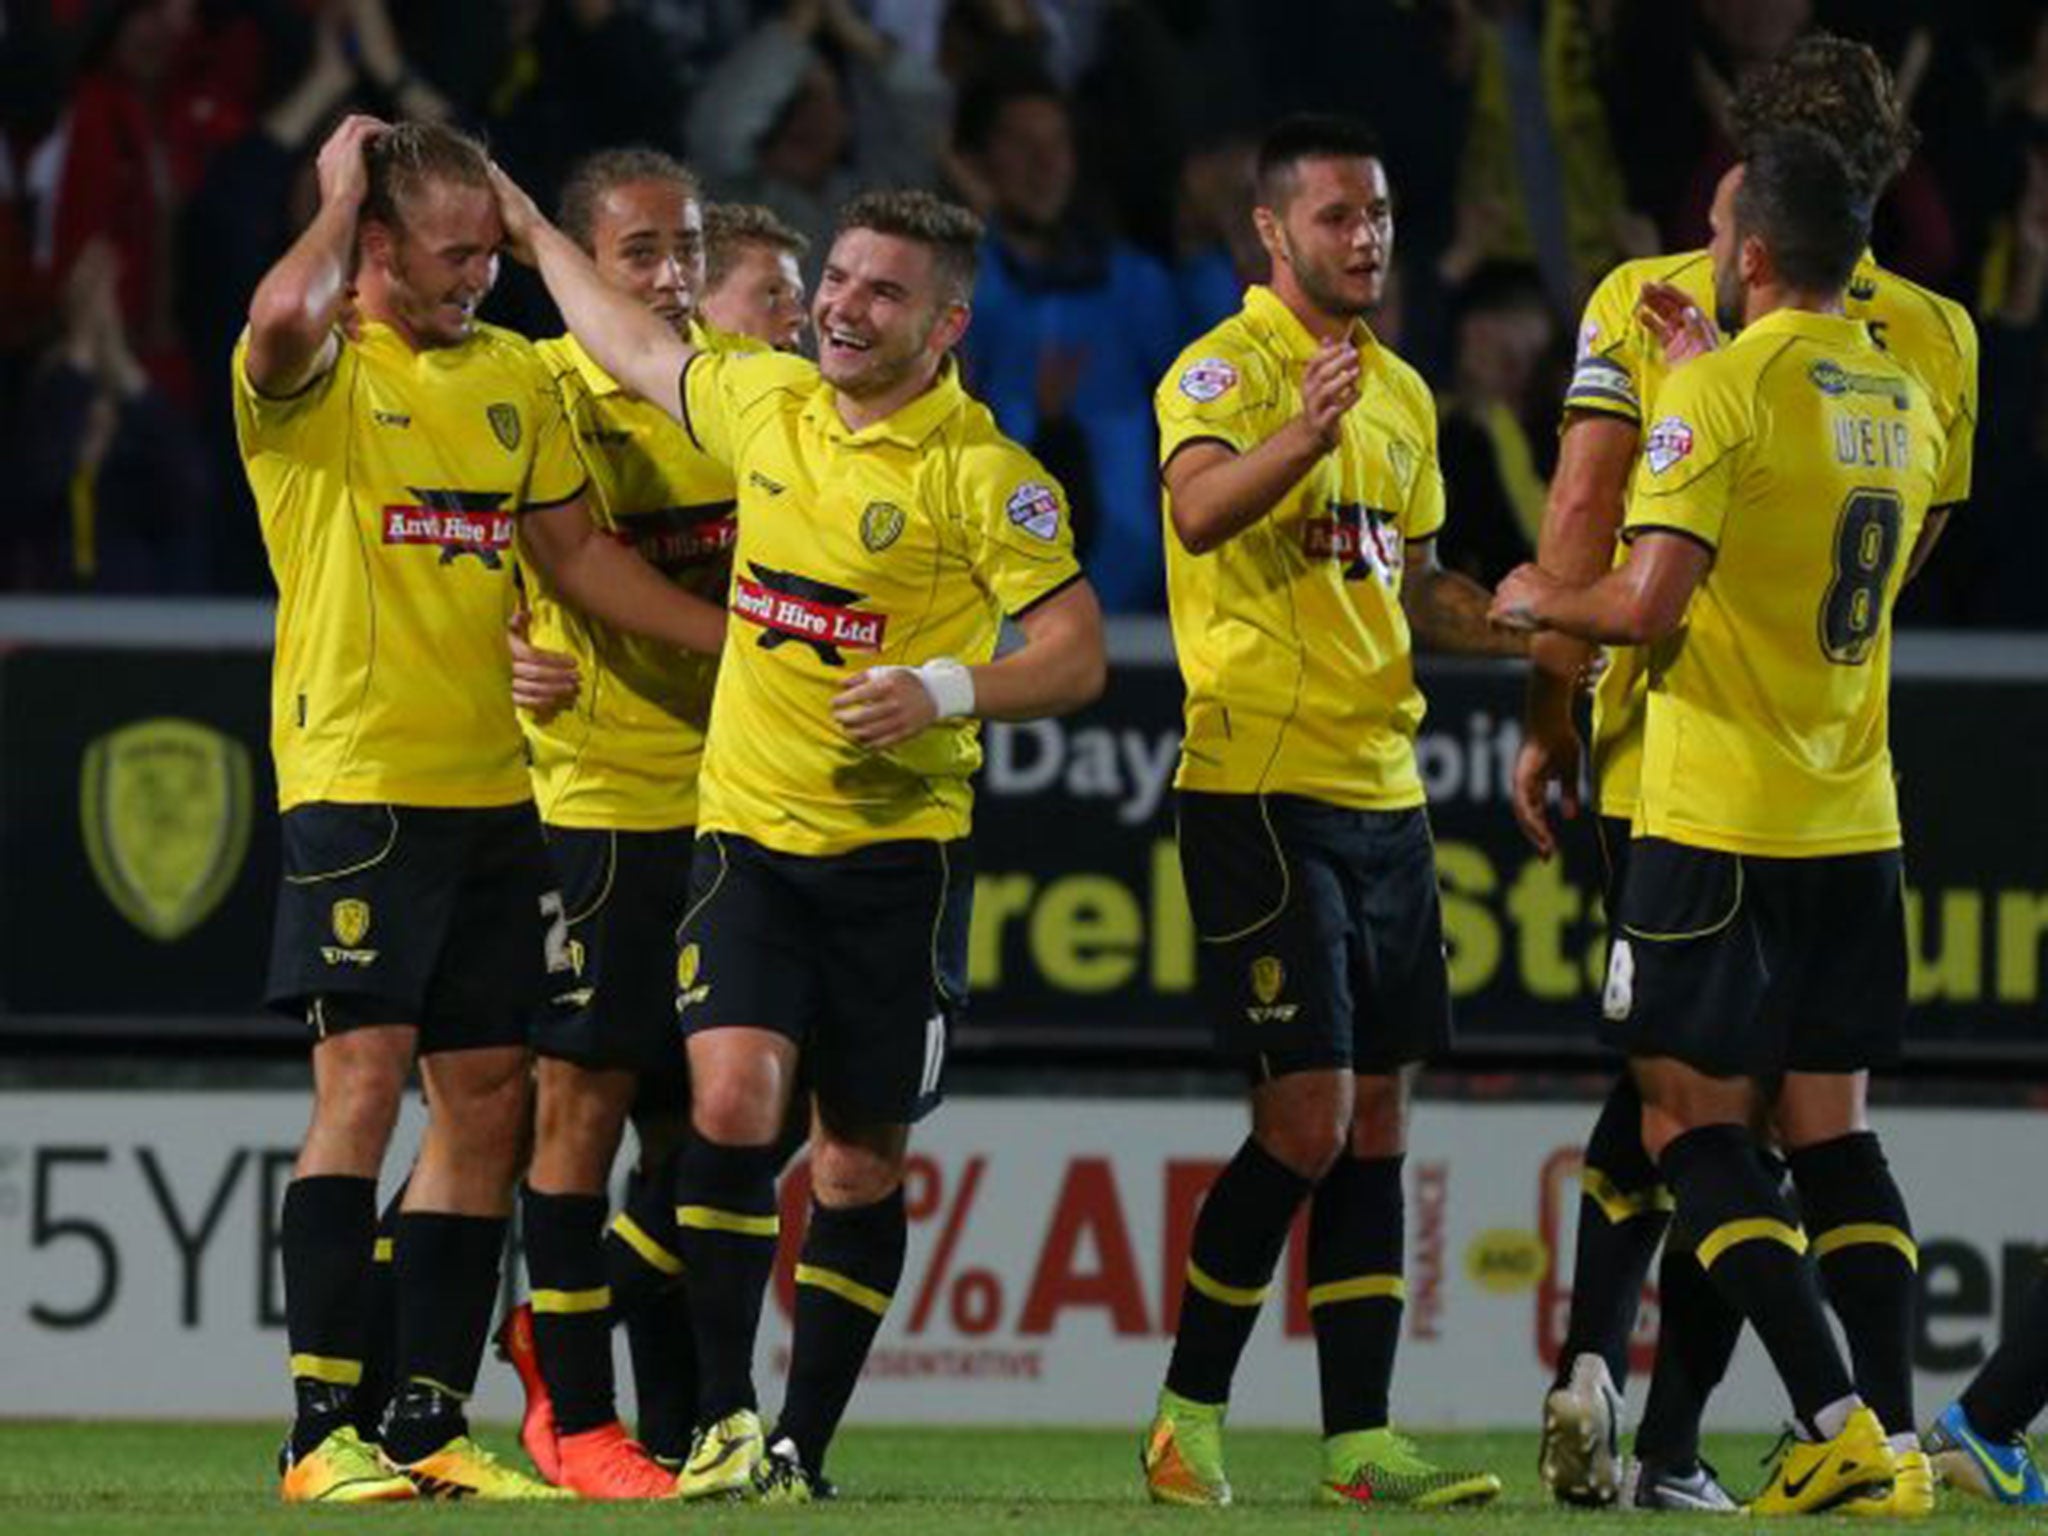 Burton Albion beat QPR 1-0 in the Capital One Cup